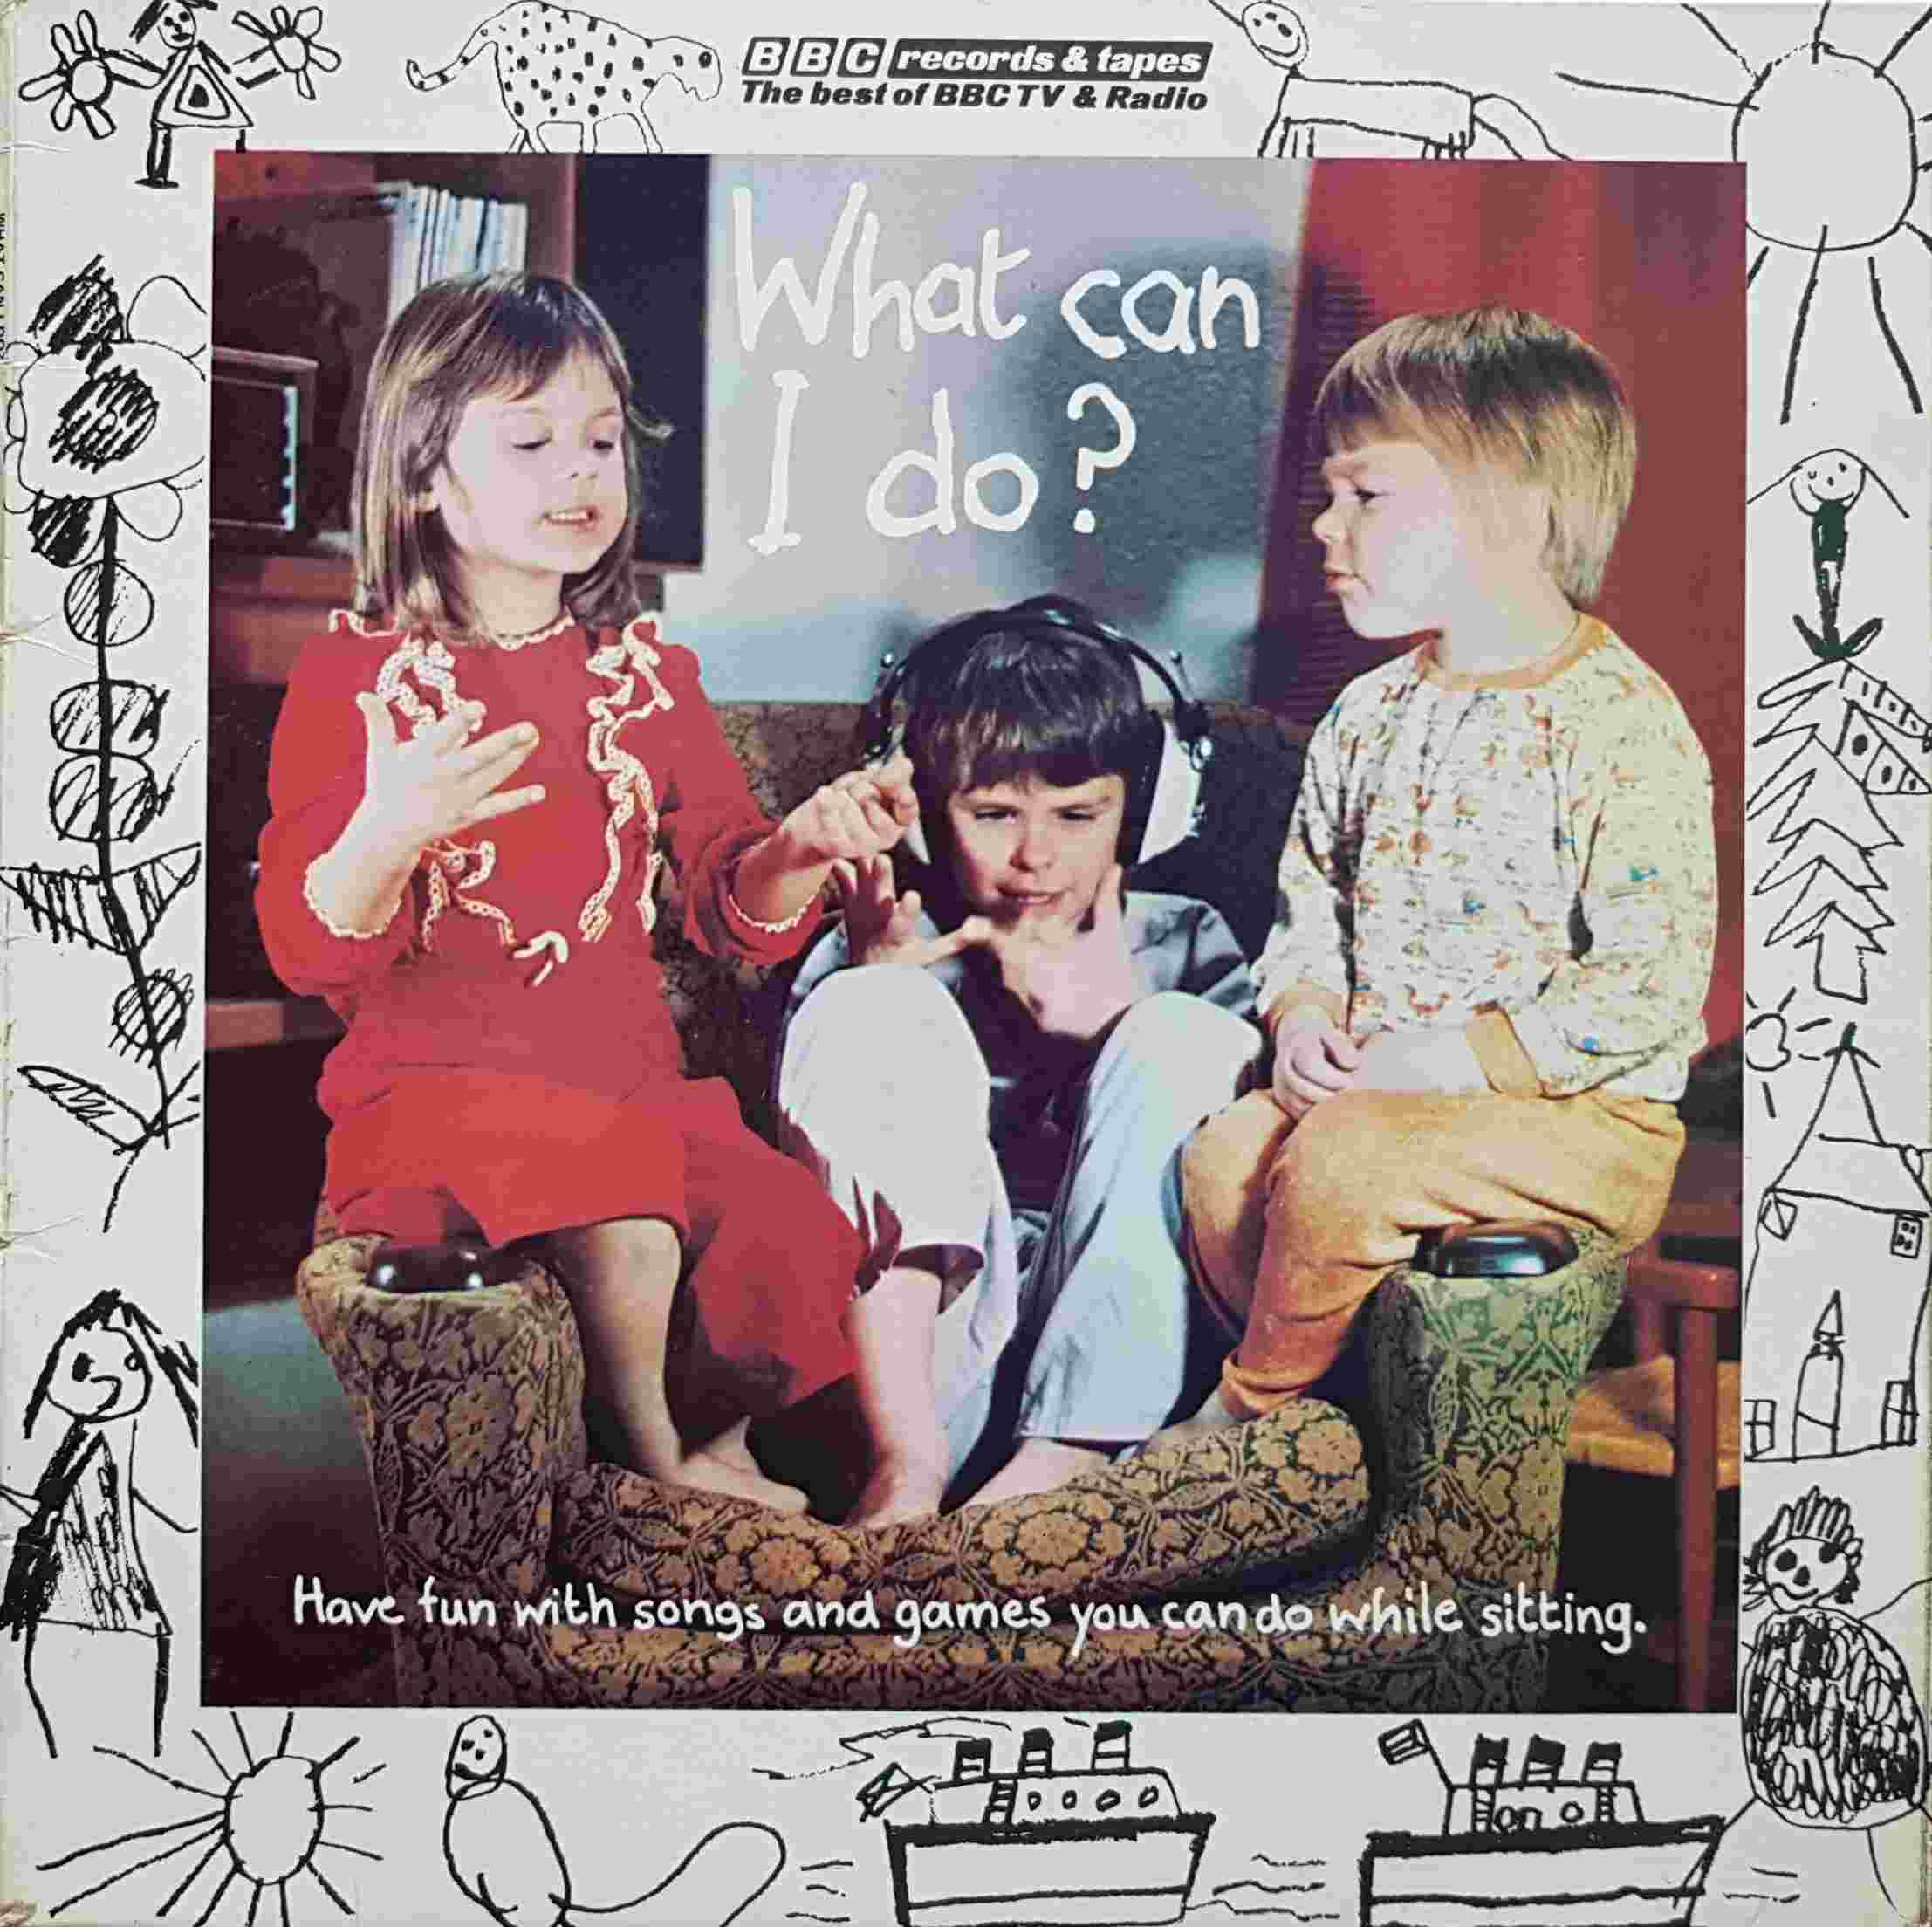 Picture of REC 199 What can I do ? by artist Various from the BBC albums - Records and Tapes library